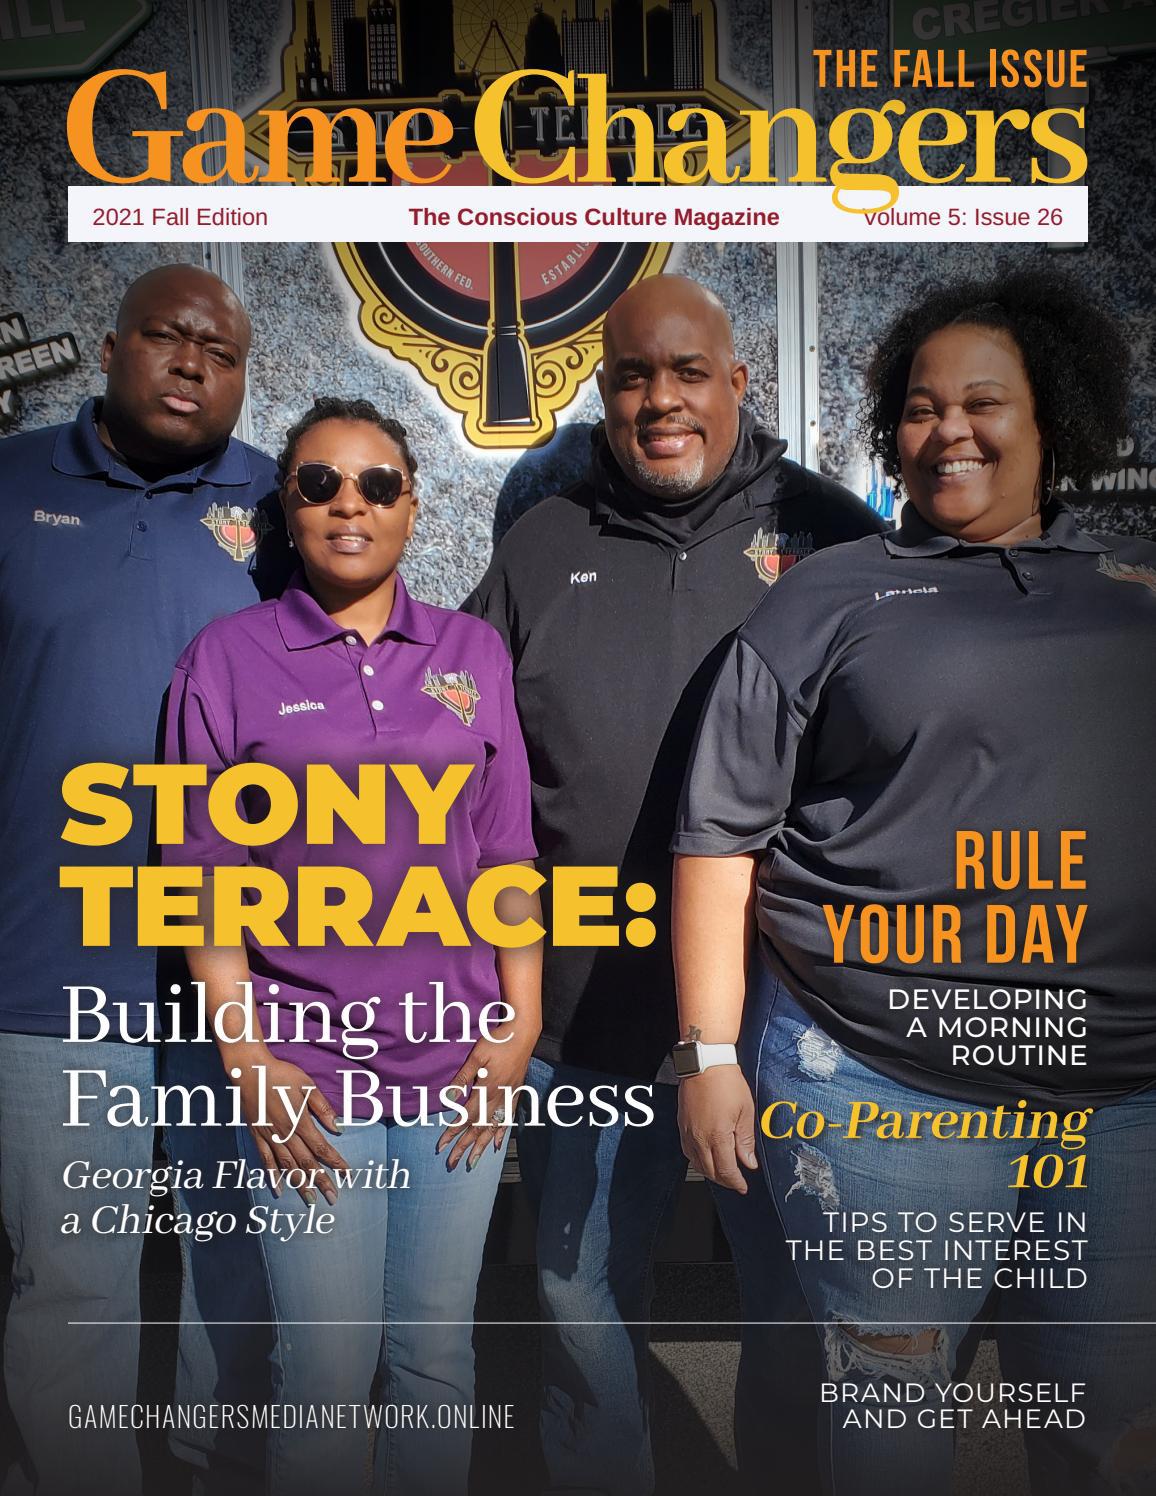 Game Changers Magazine 2021 Fall Edition Featuring Stony Terrace